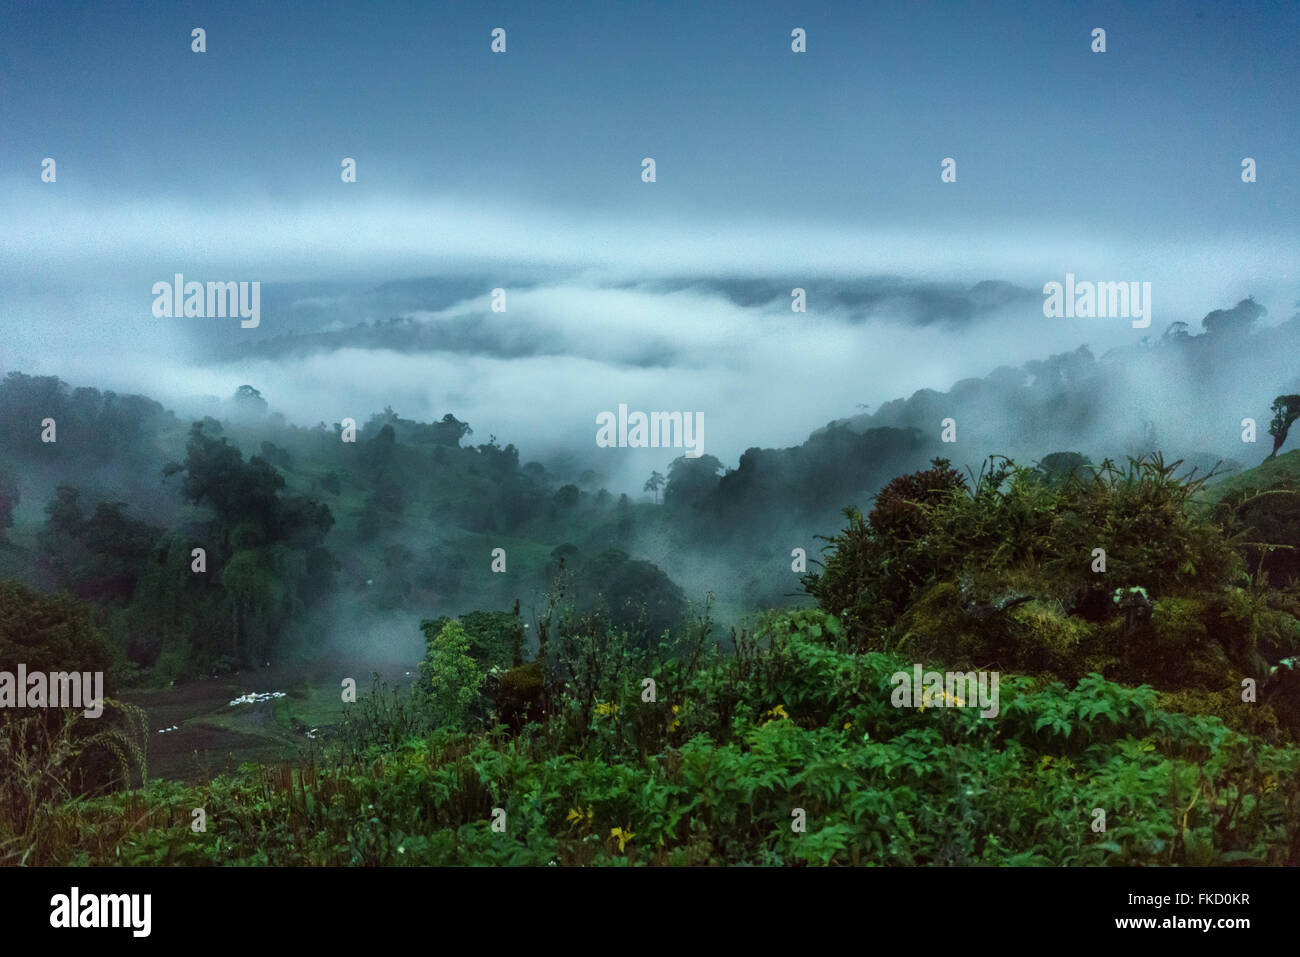 Scenics view of forest with mountain in foggy weather, Costa Rica Stock Photo